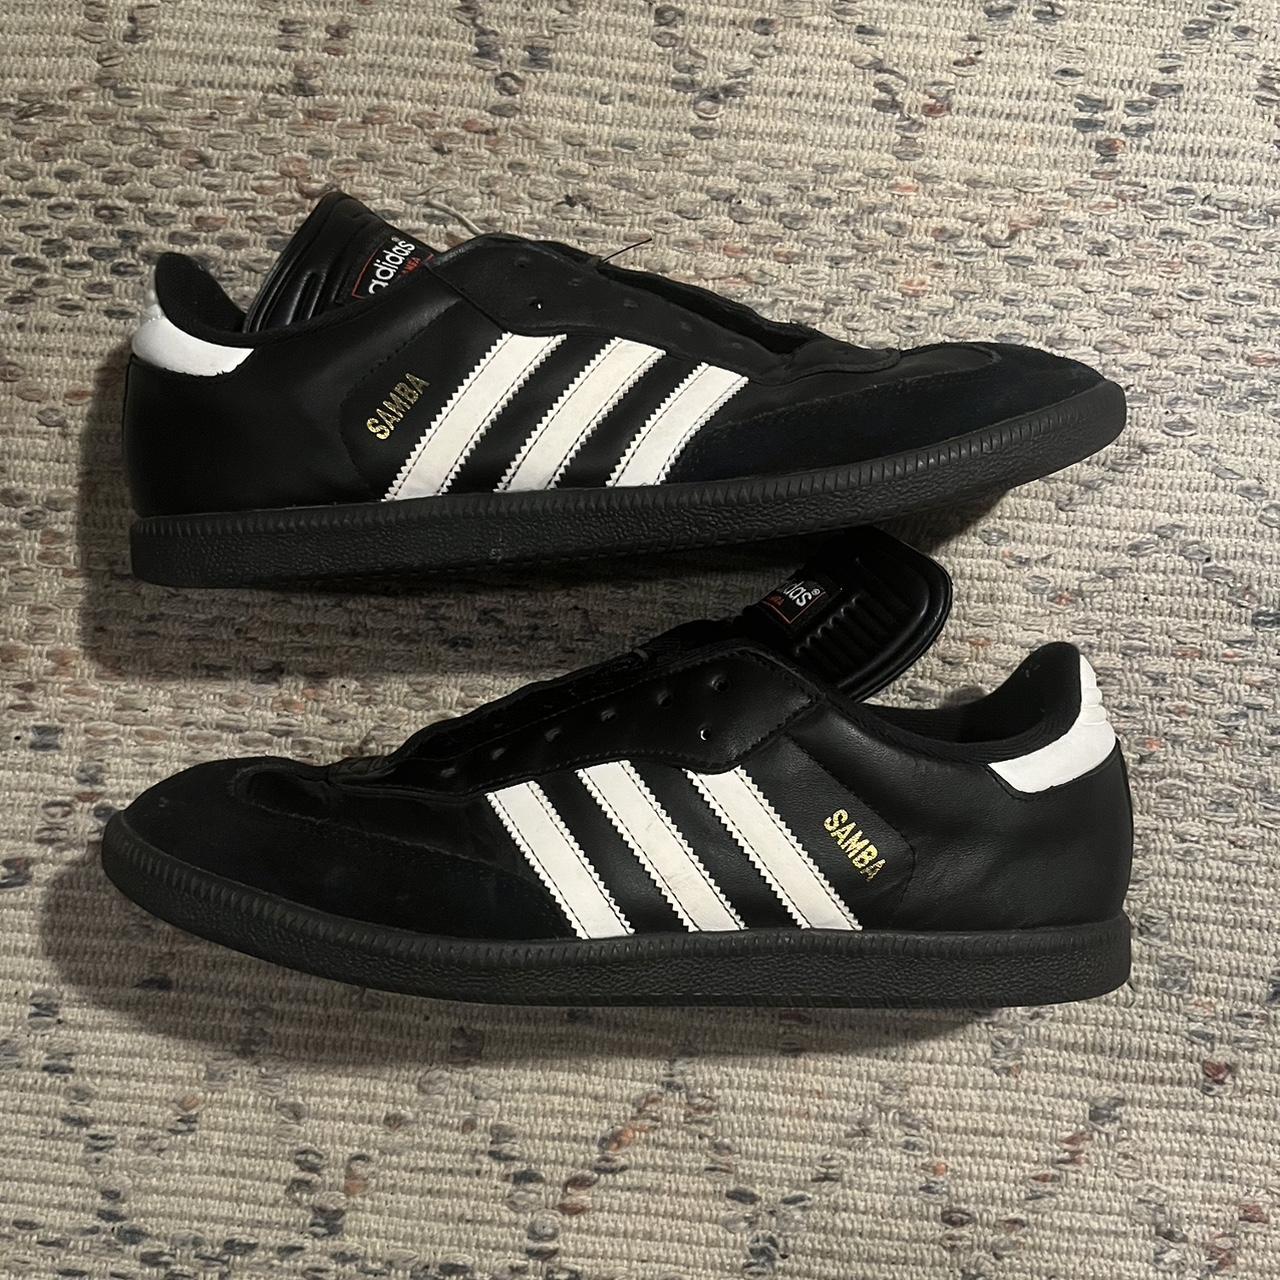 Adidas Men's Black and White Trainers (3)